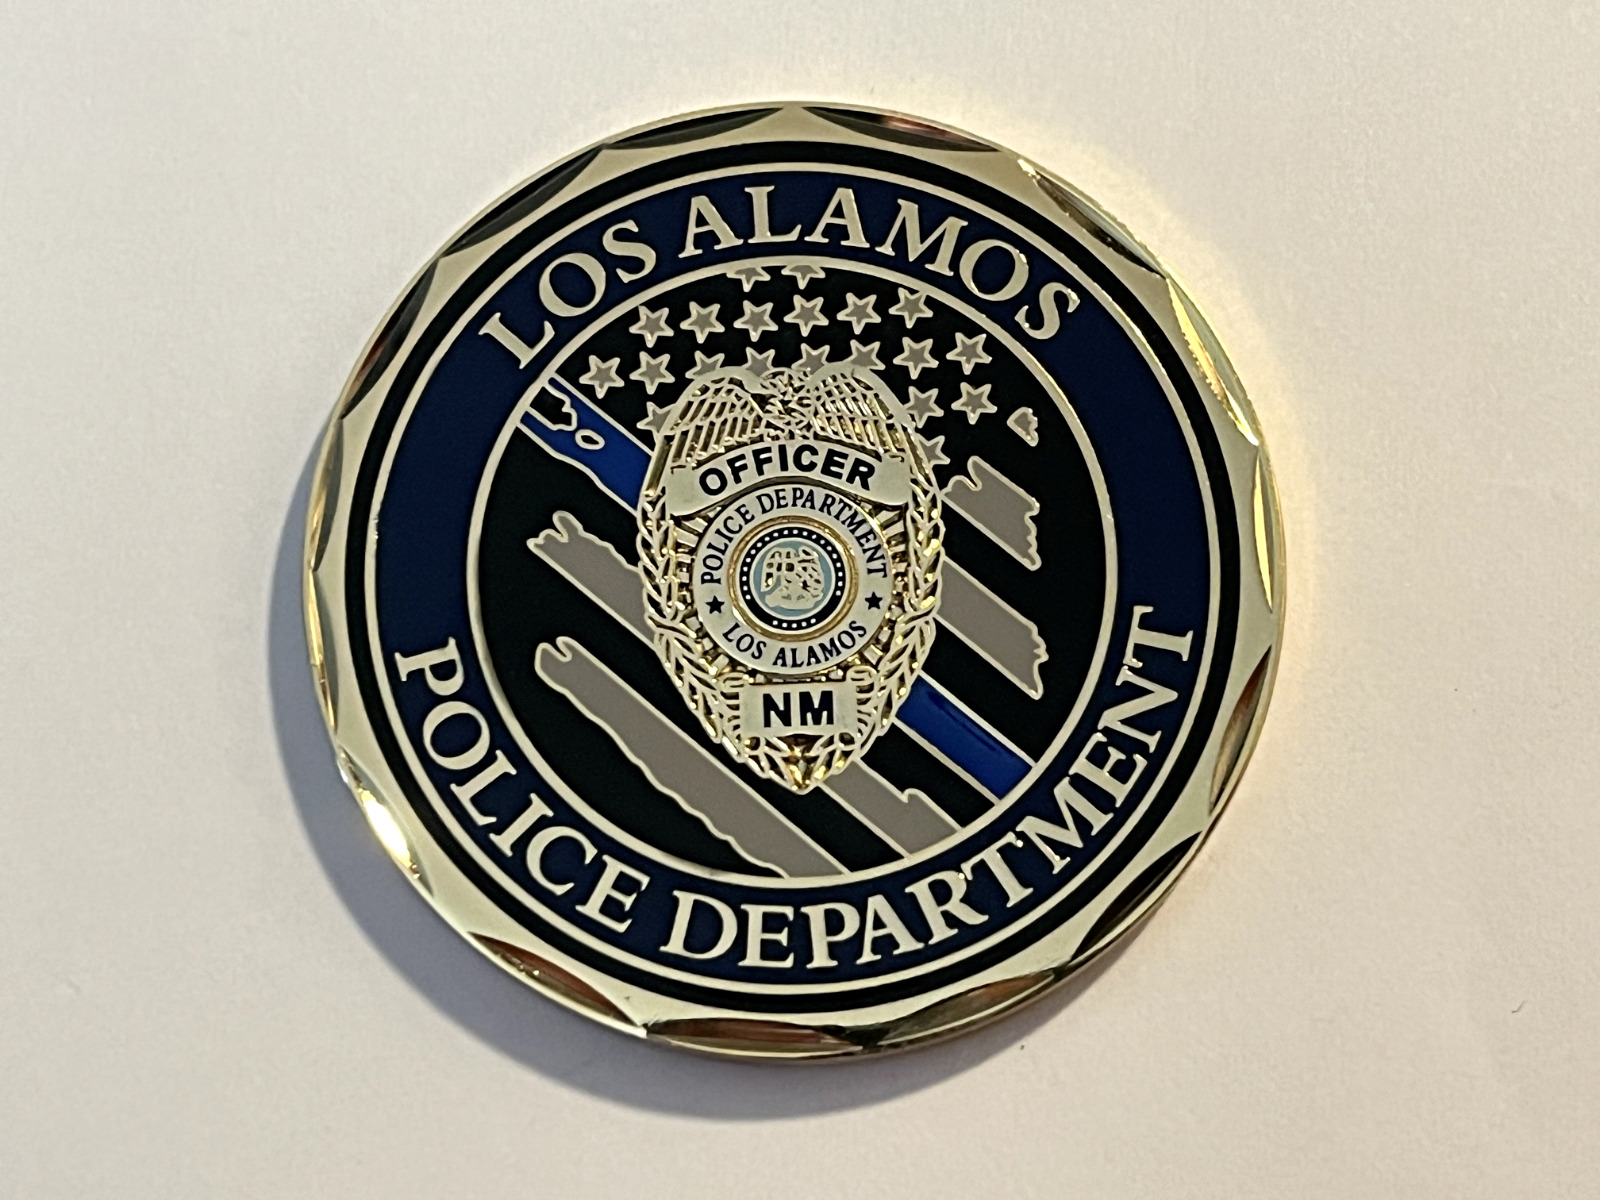 Los Alamos (NM) Police Department Challenge Coin  (C36)